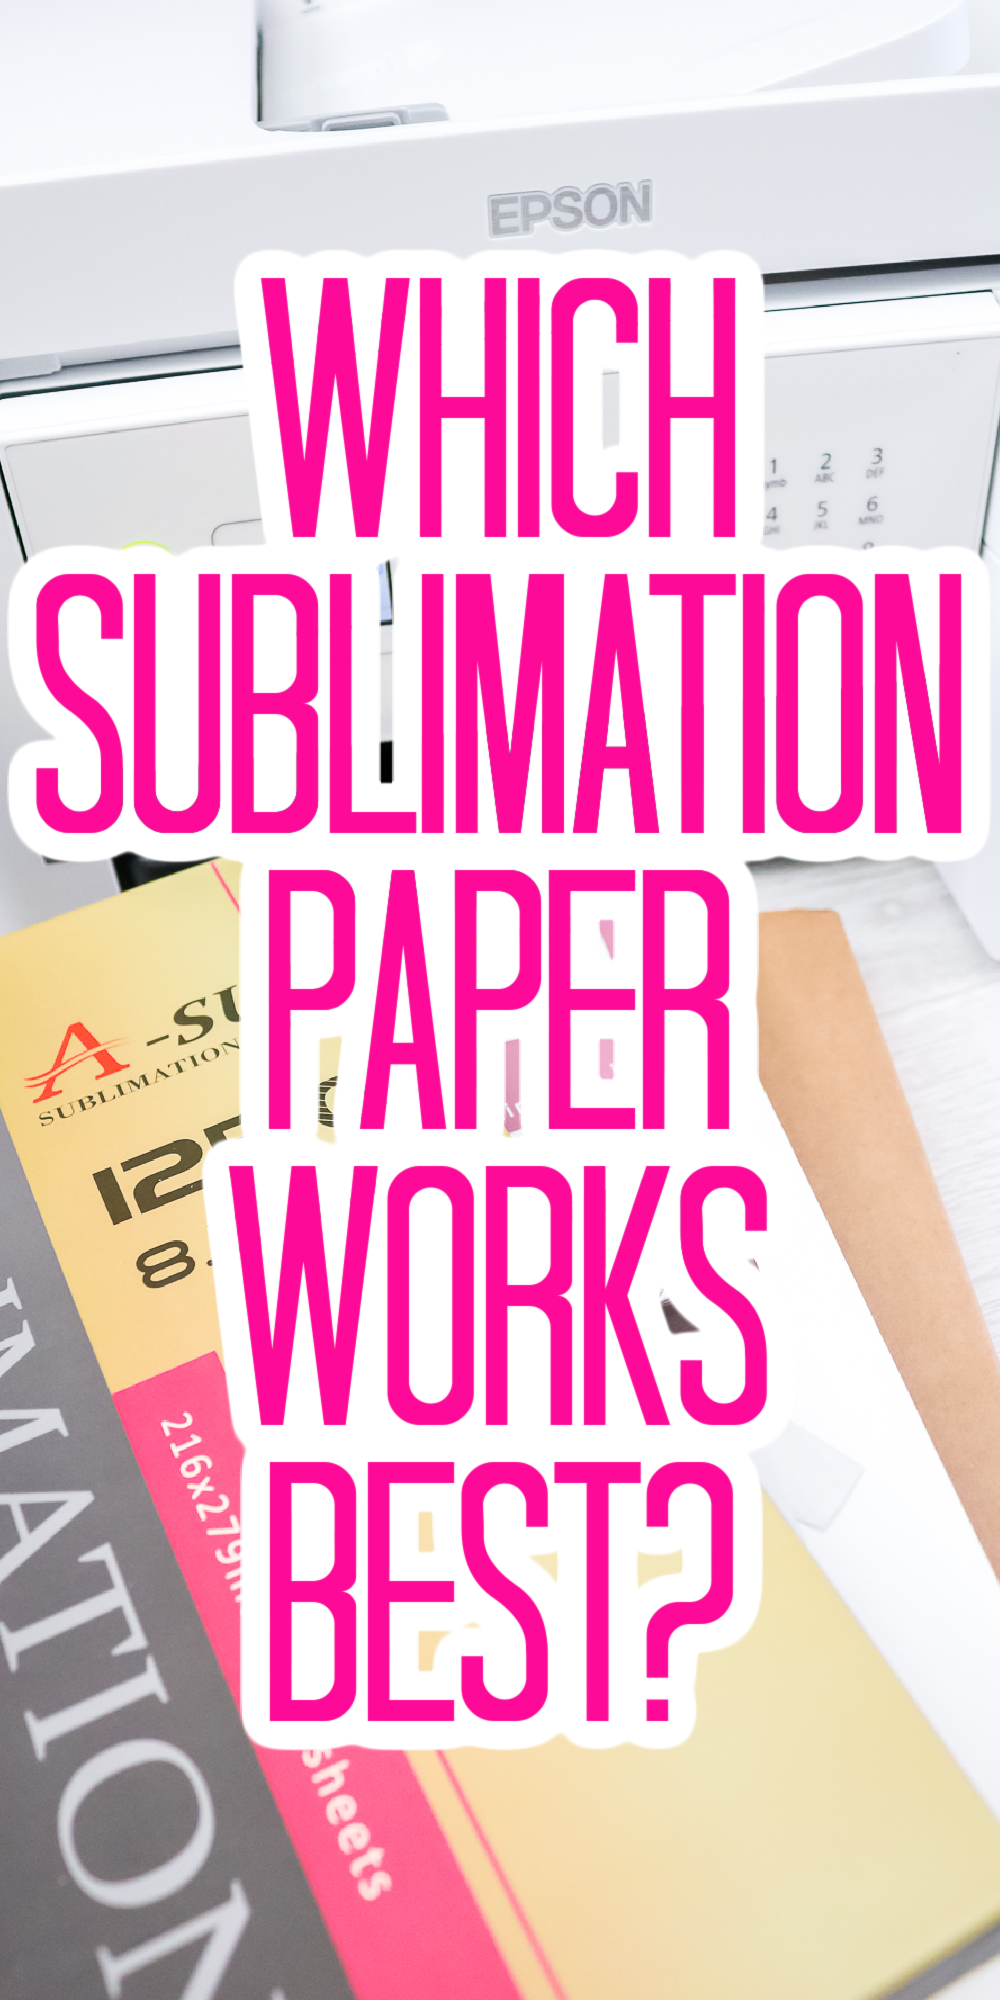 Sublimation Paper Comparison: Which is best? - Angie Holden The Country  Chic Cottage